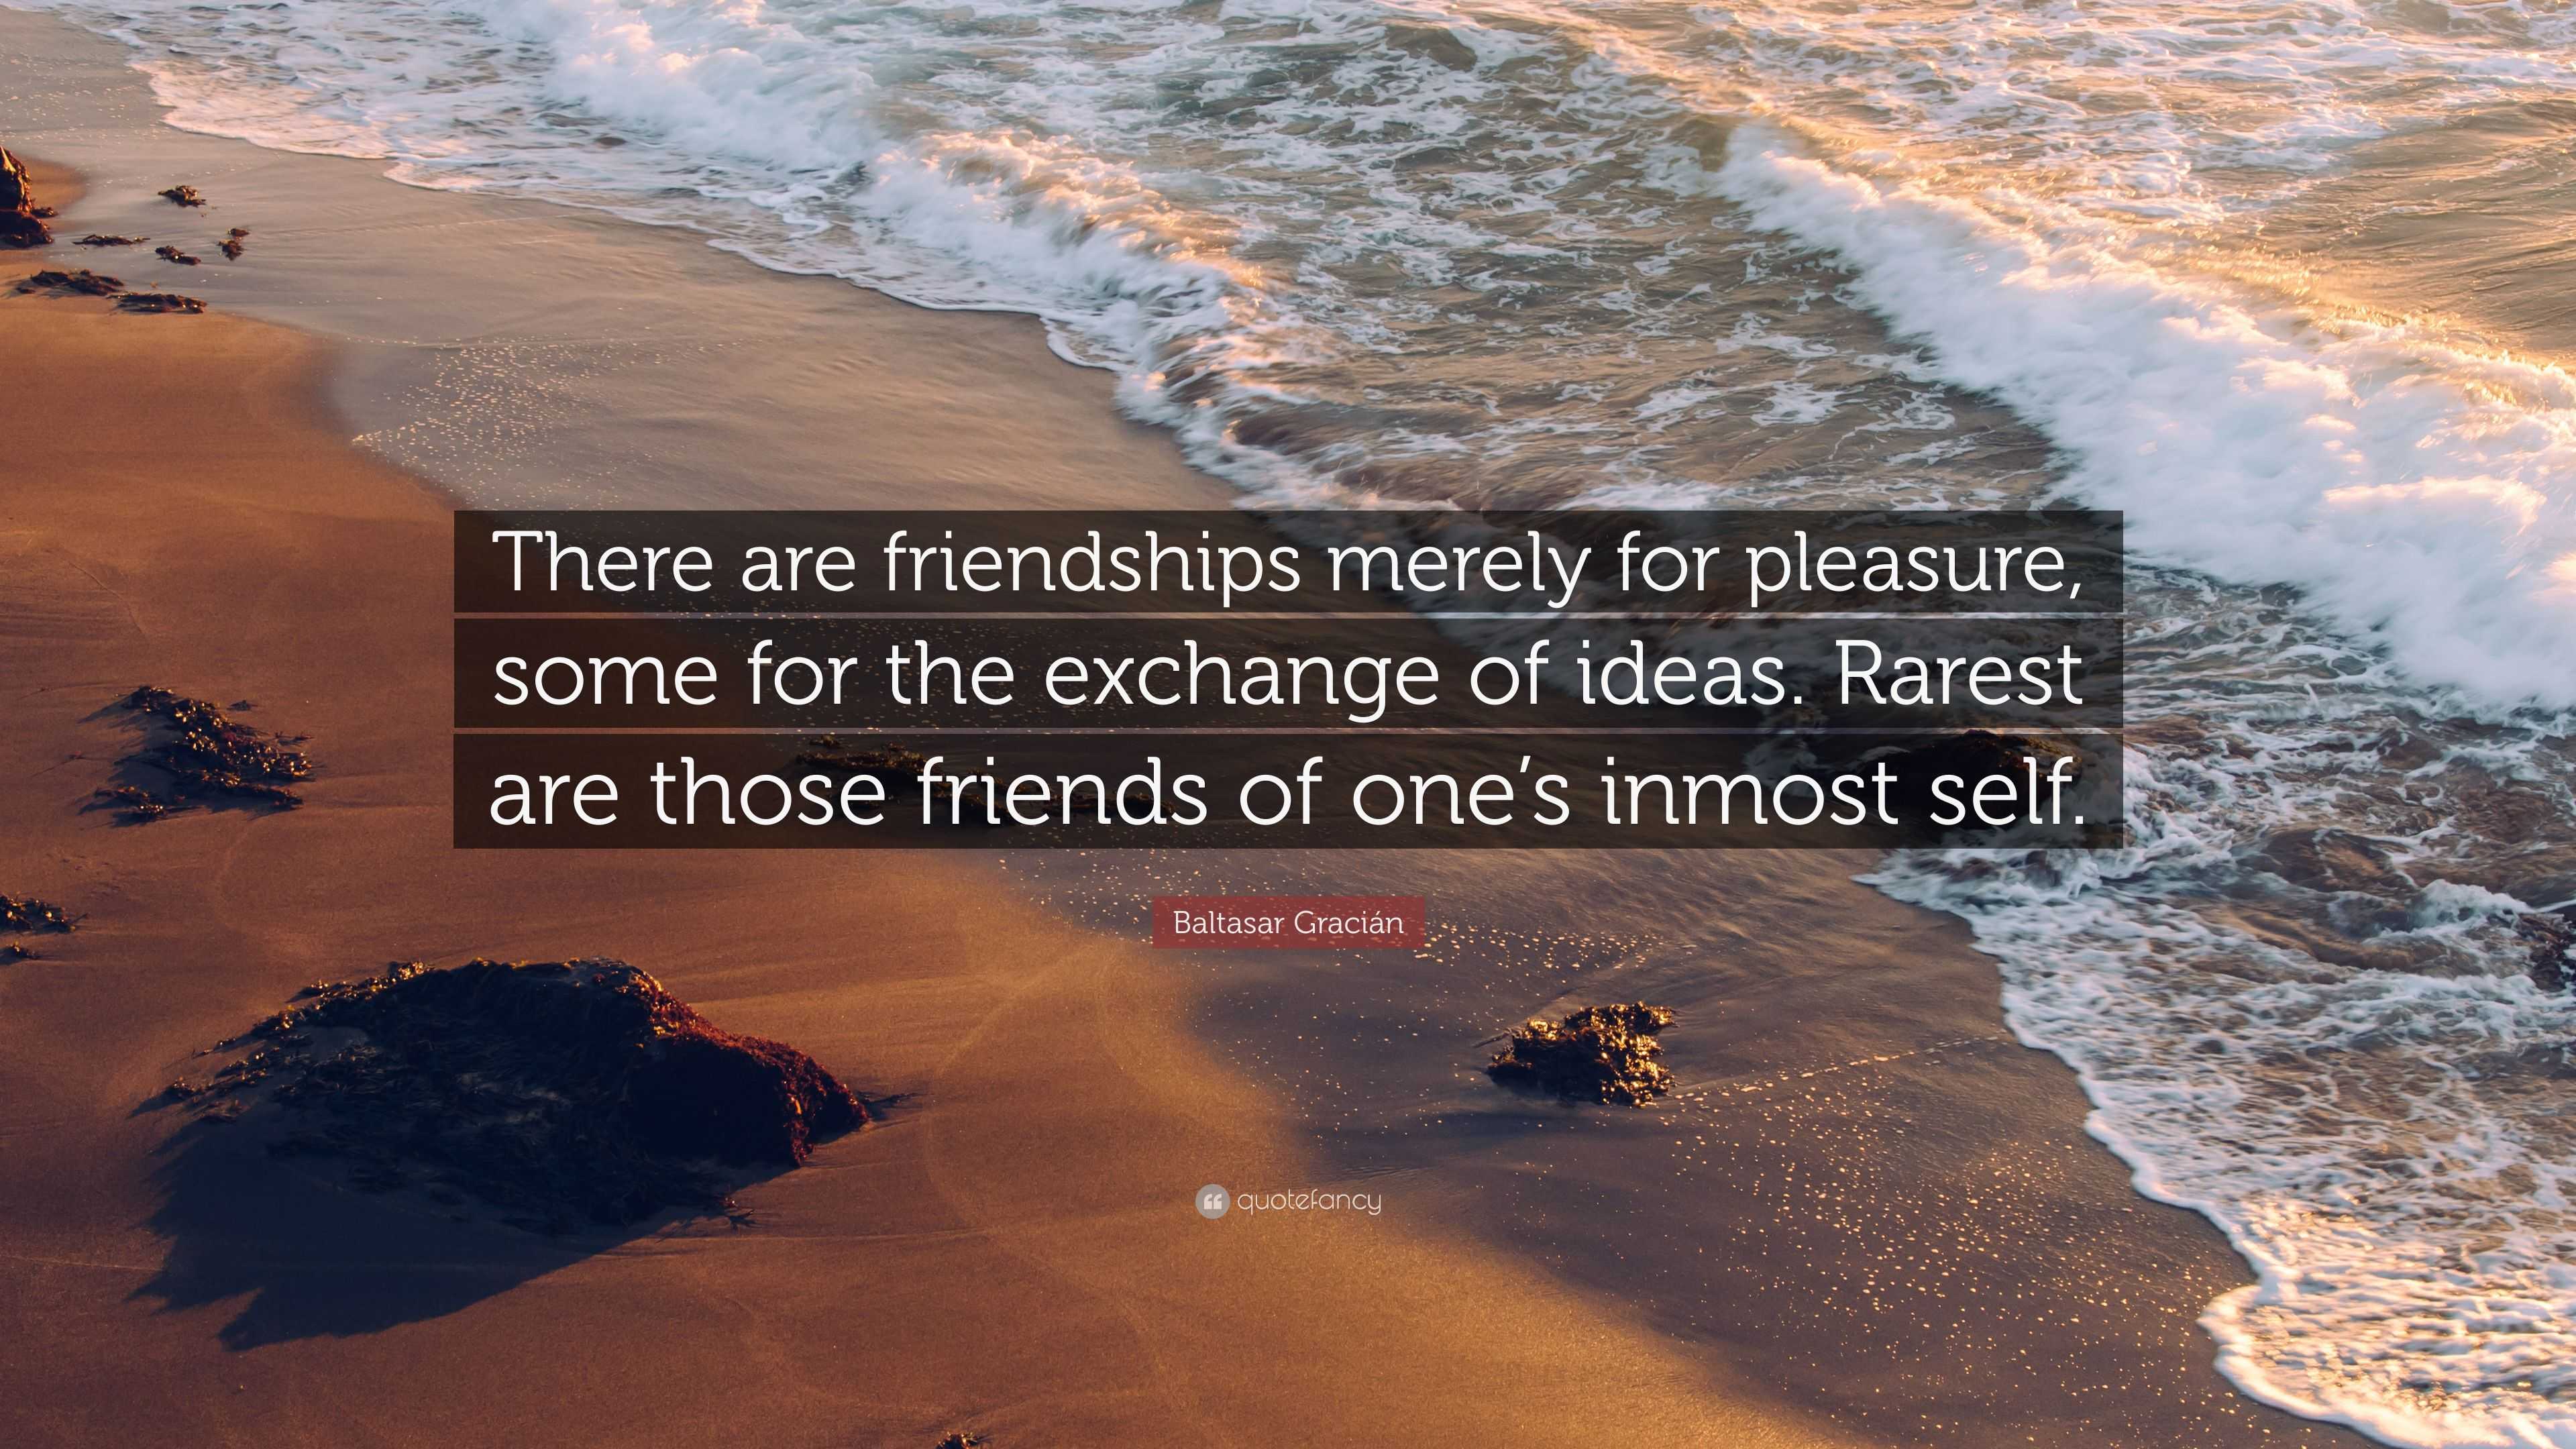 Baltasar Gracián Quote: “There are friendships merely for pleasure ...